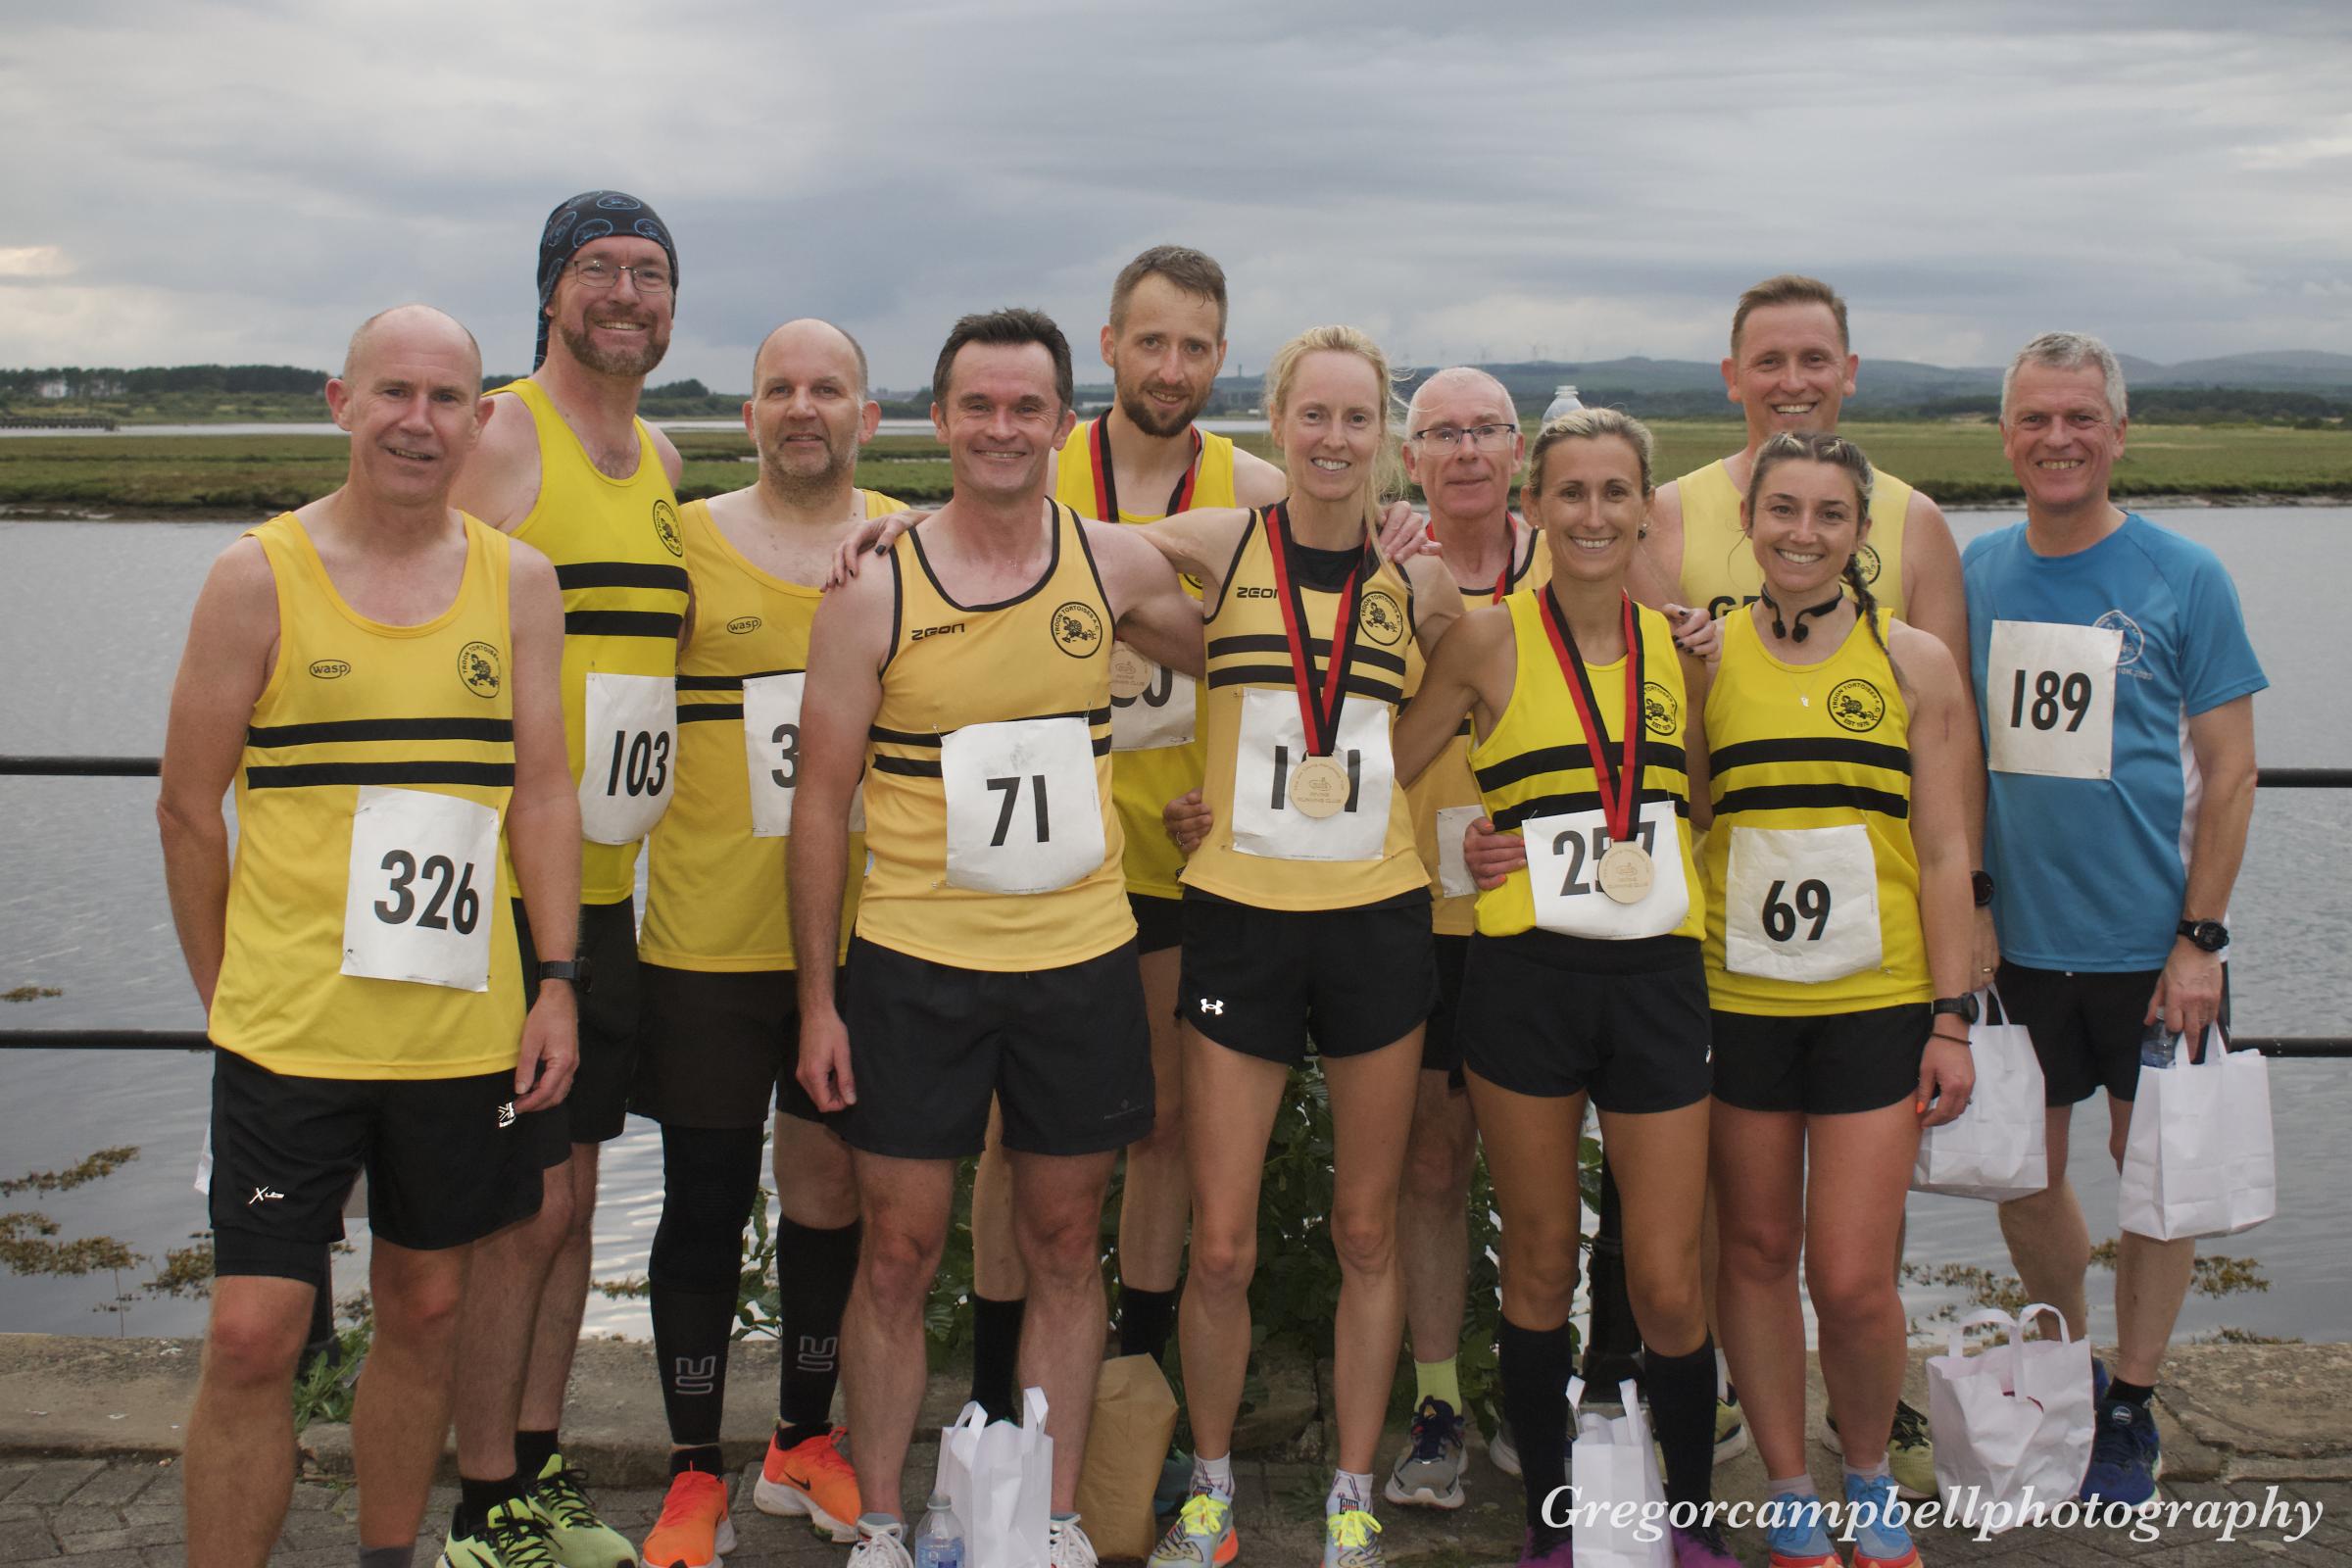 Irvine Running Clubs annual Marymass 10K road race was held on August 23 - with a field of more than 300 runners (Image: Gregor Campbell Photography)